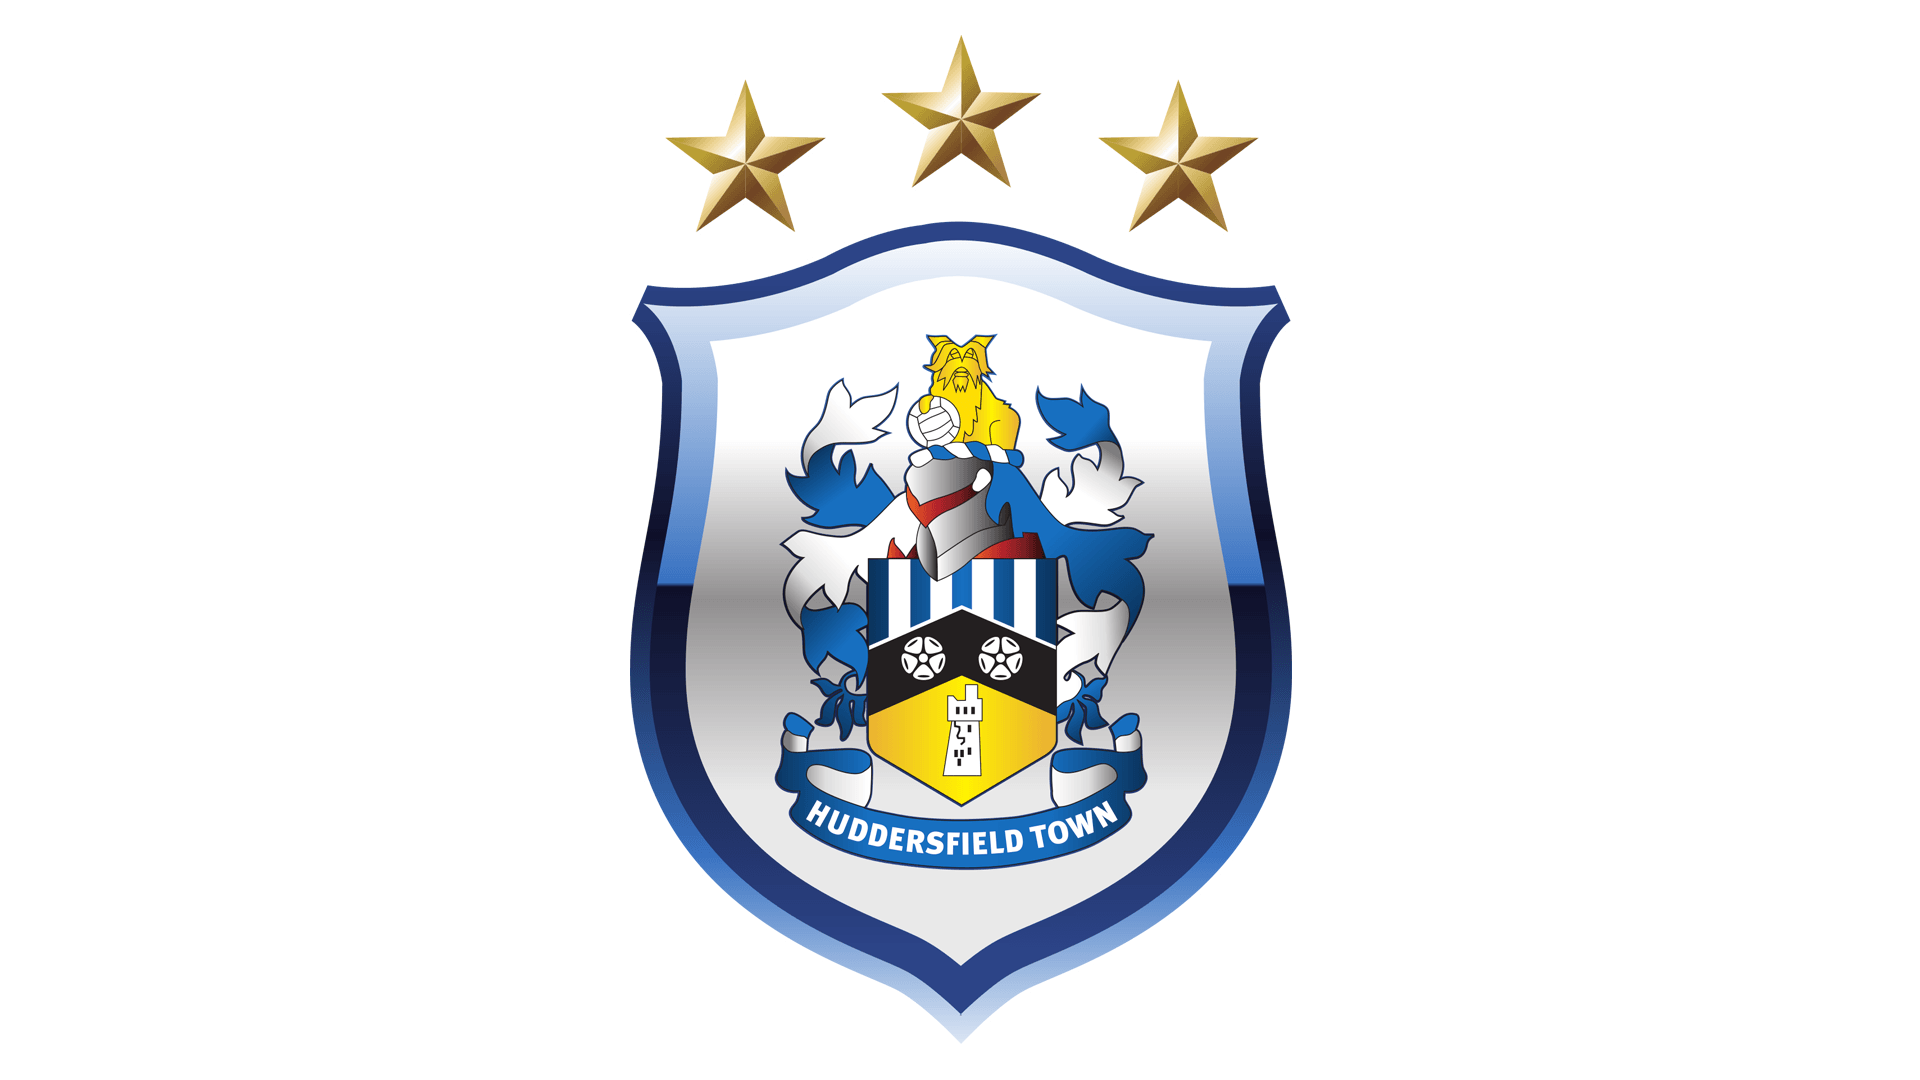 Huddersfield Town Logo - Huddersfield Town logo, Huddersfield Town Symbol, Meaning, History